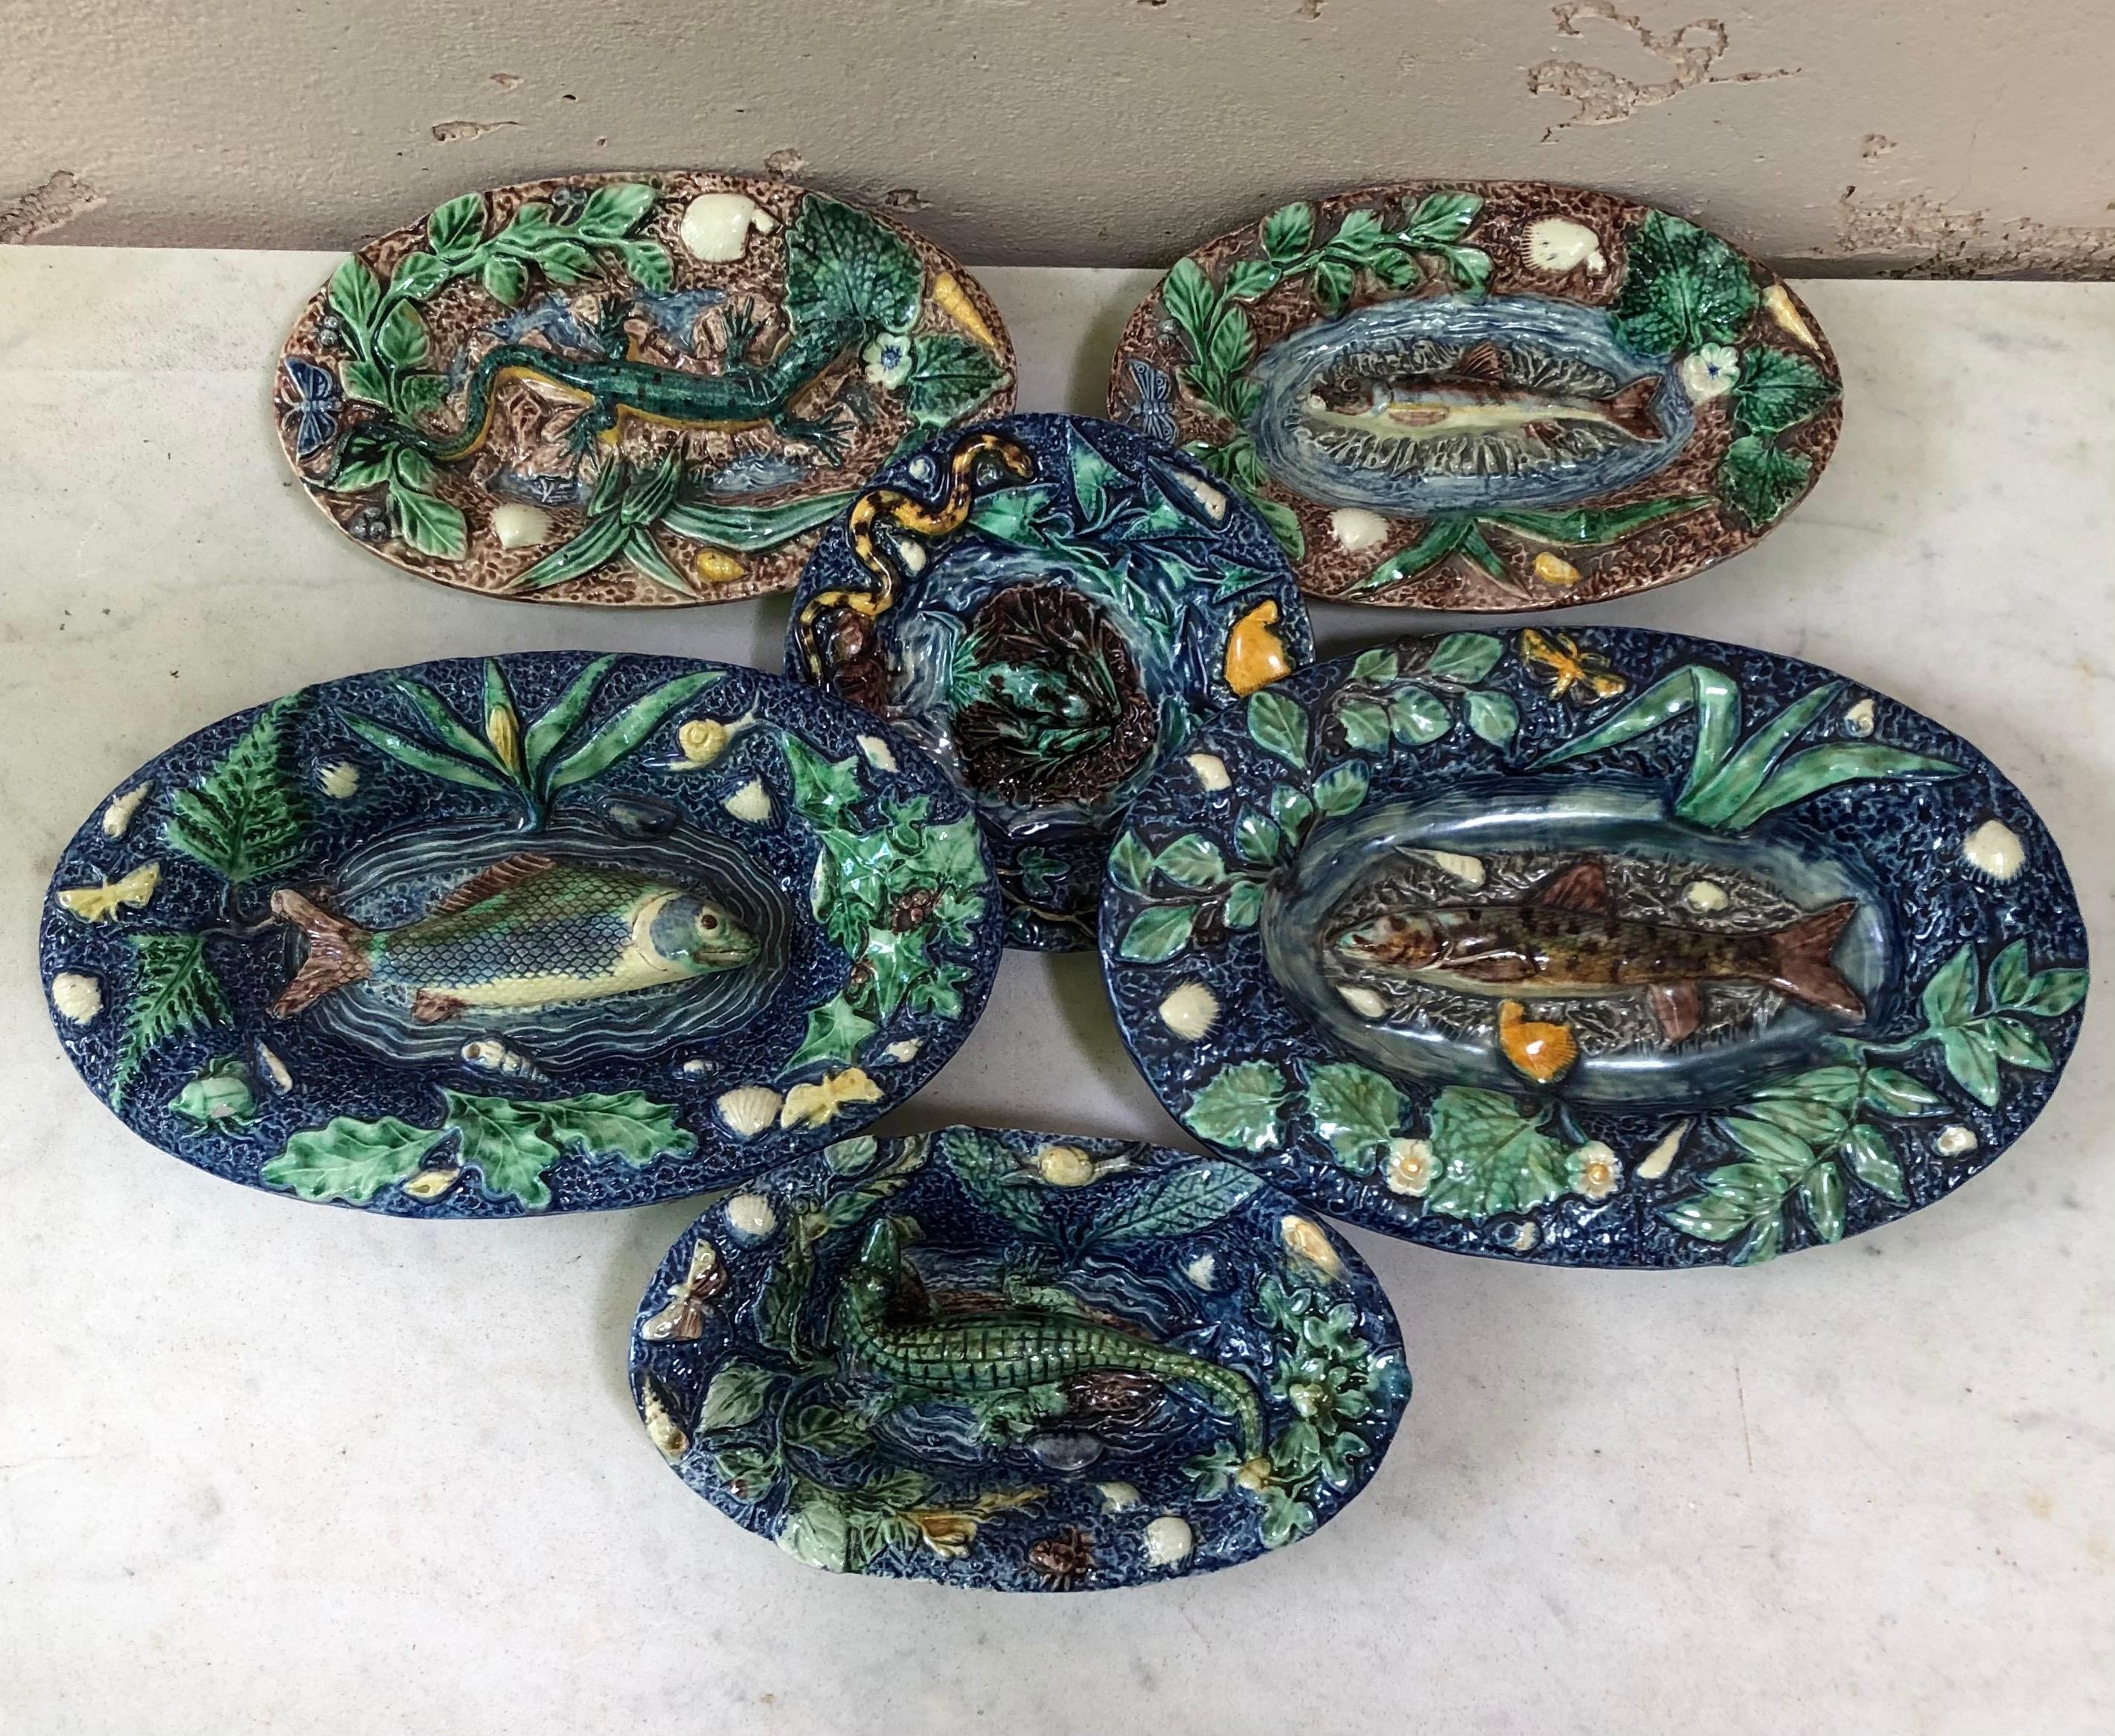 Late 19th Century 19th Century Majolica Palissy Portuguese Fishes & Eel Wall Platter Jose A. Cunha For Sale